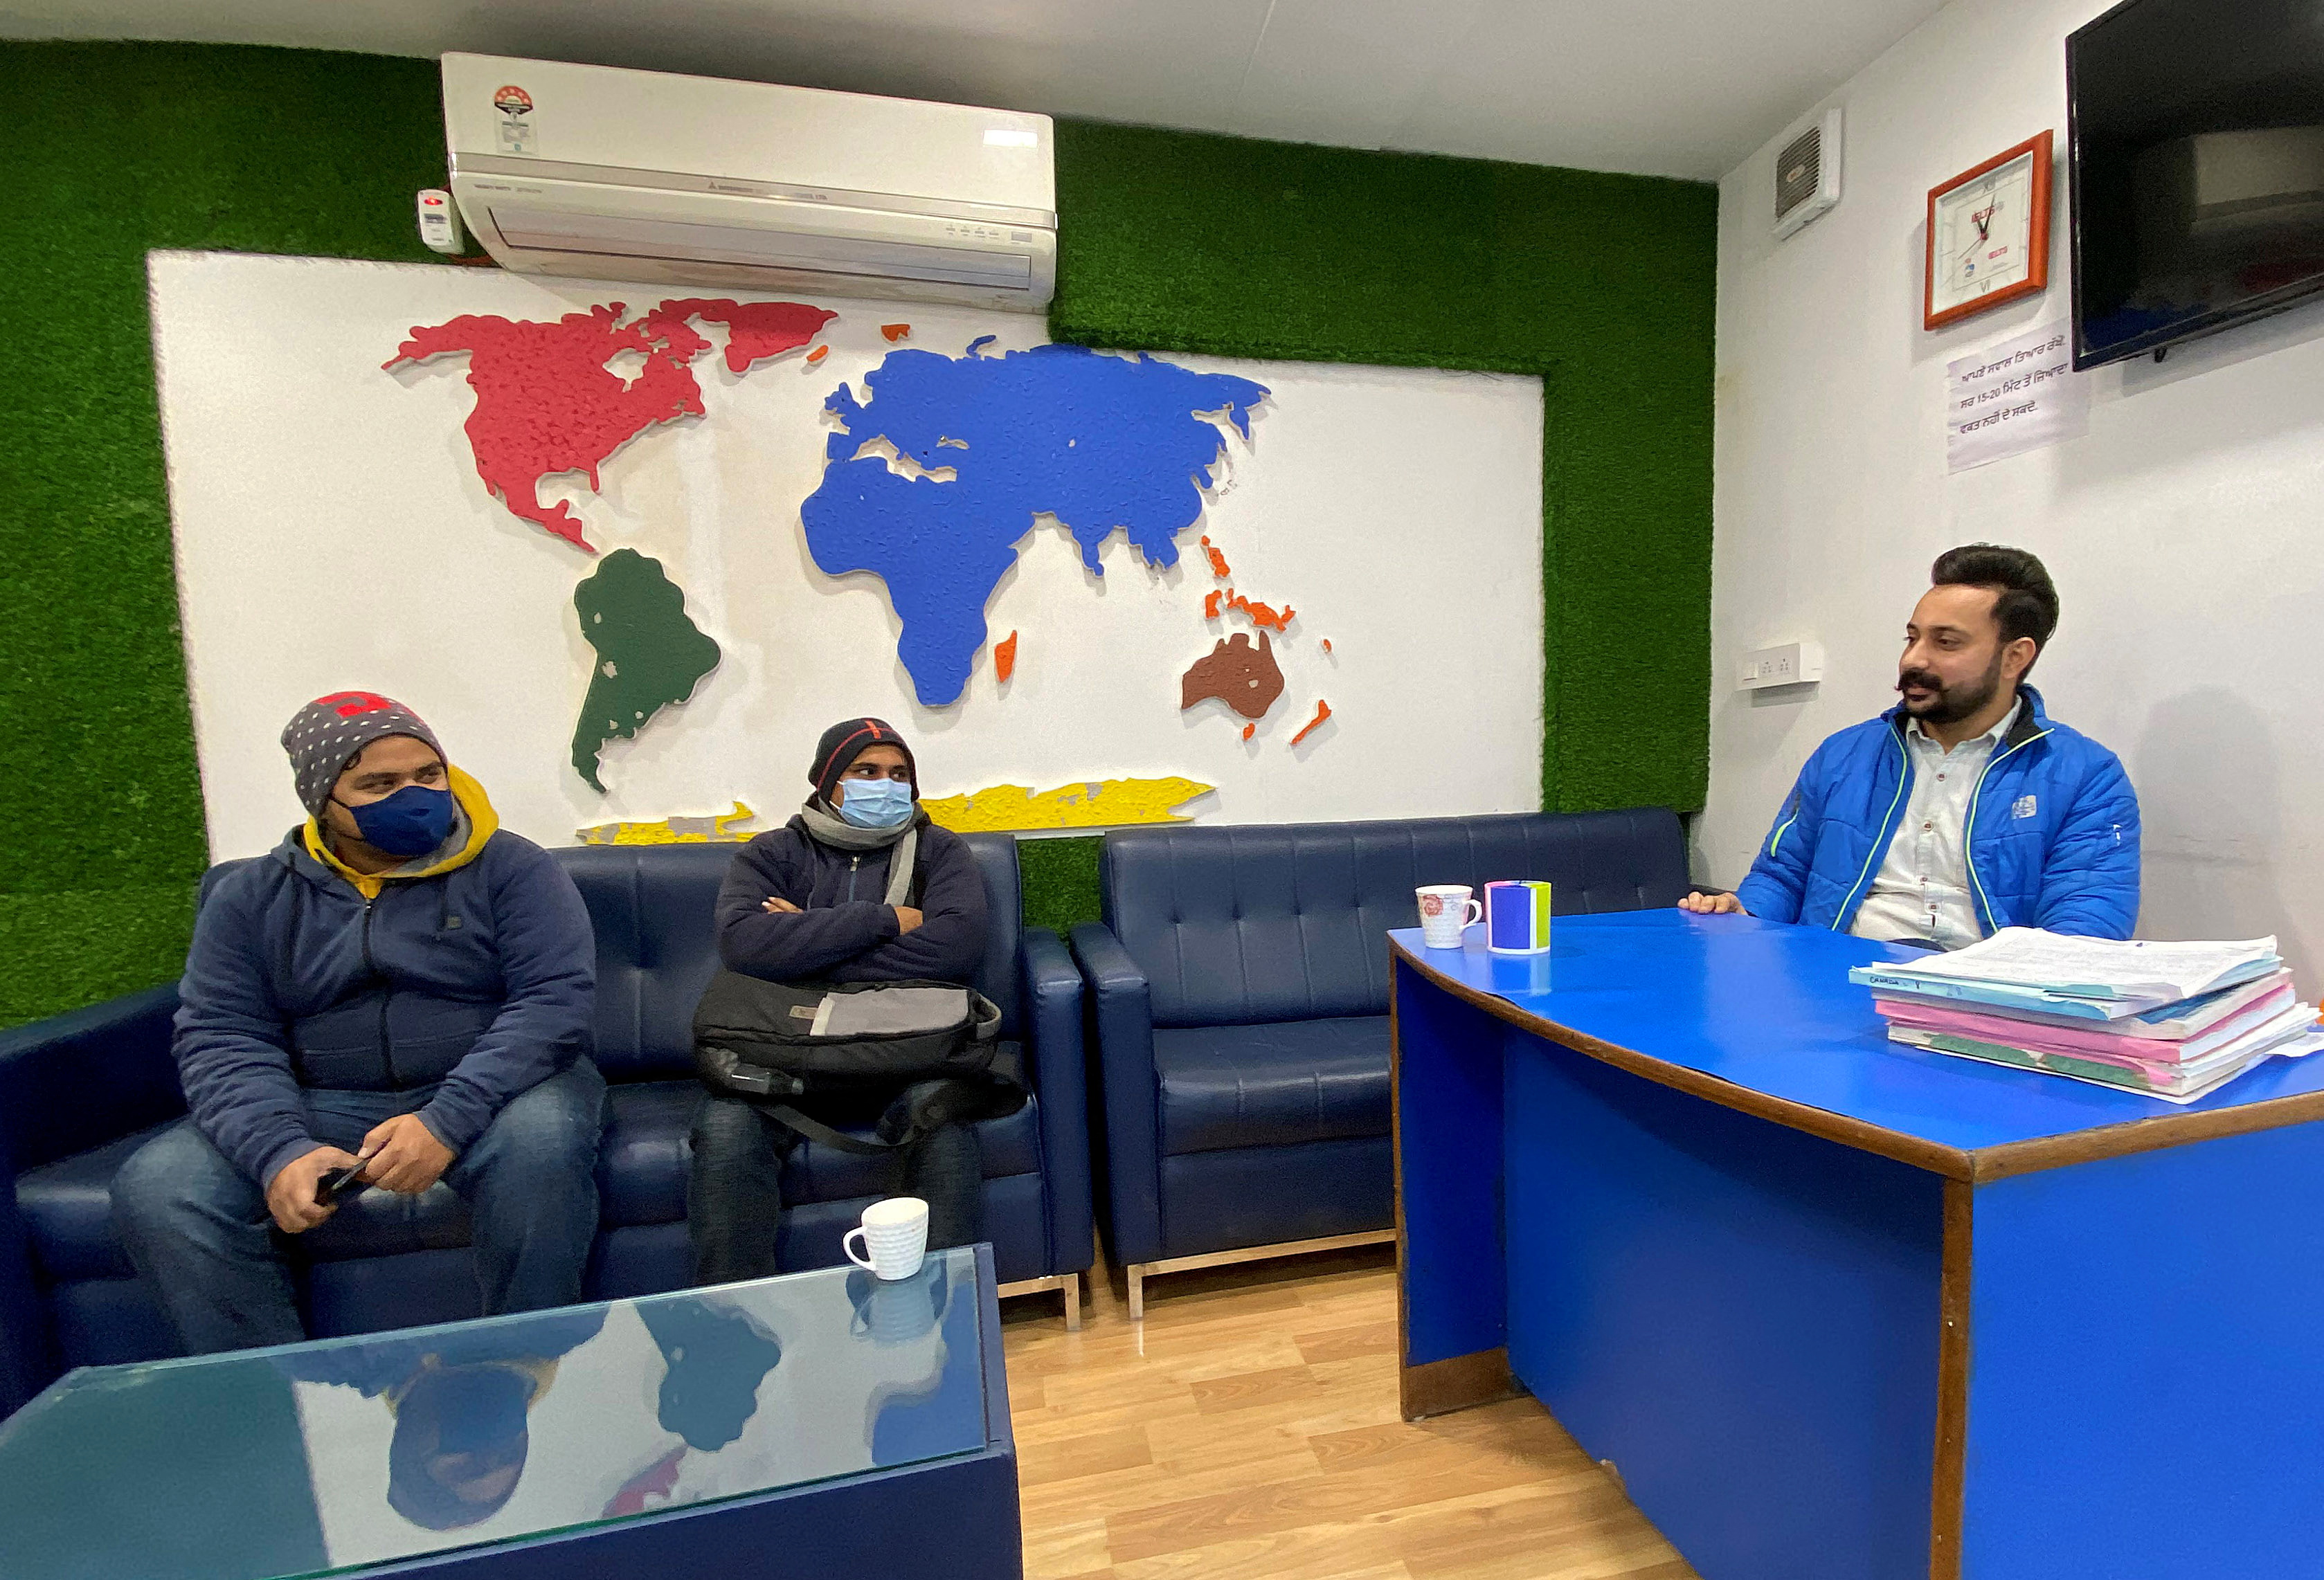 Srijan Upadhyay and Sagar Sharma from the eastern state of Bihar listen to Lovepreet, an immigration counsellor of Blue Line consultants, at his office in Rajpura